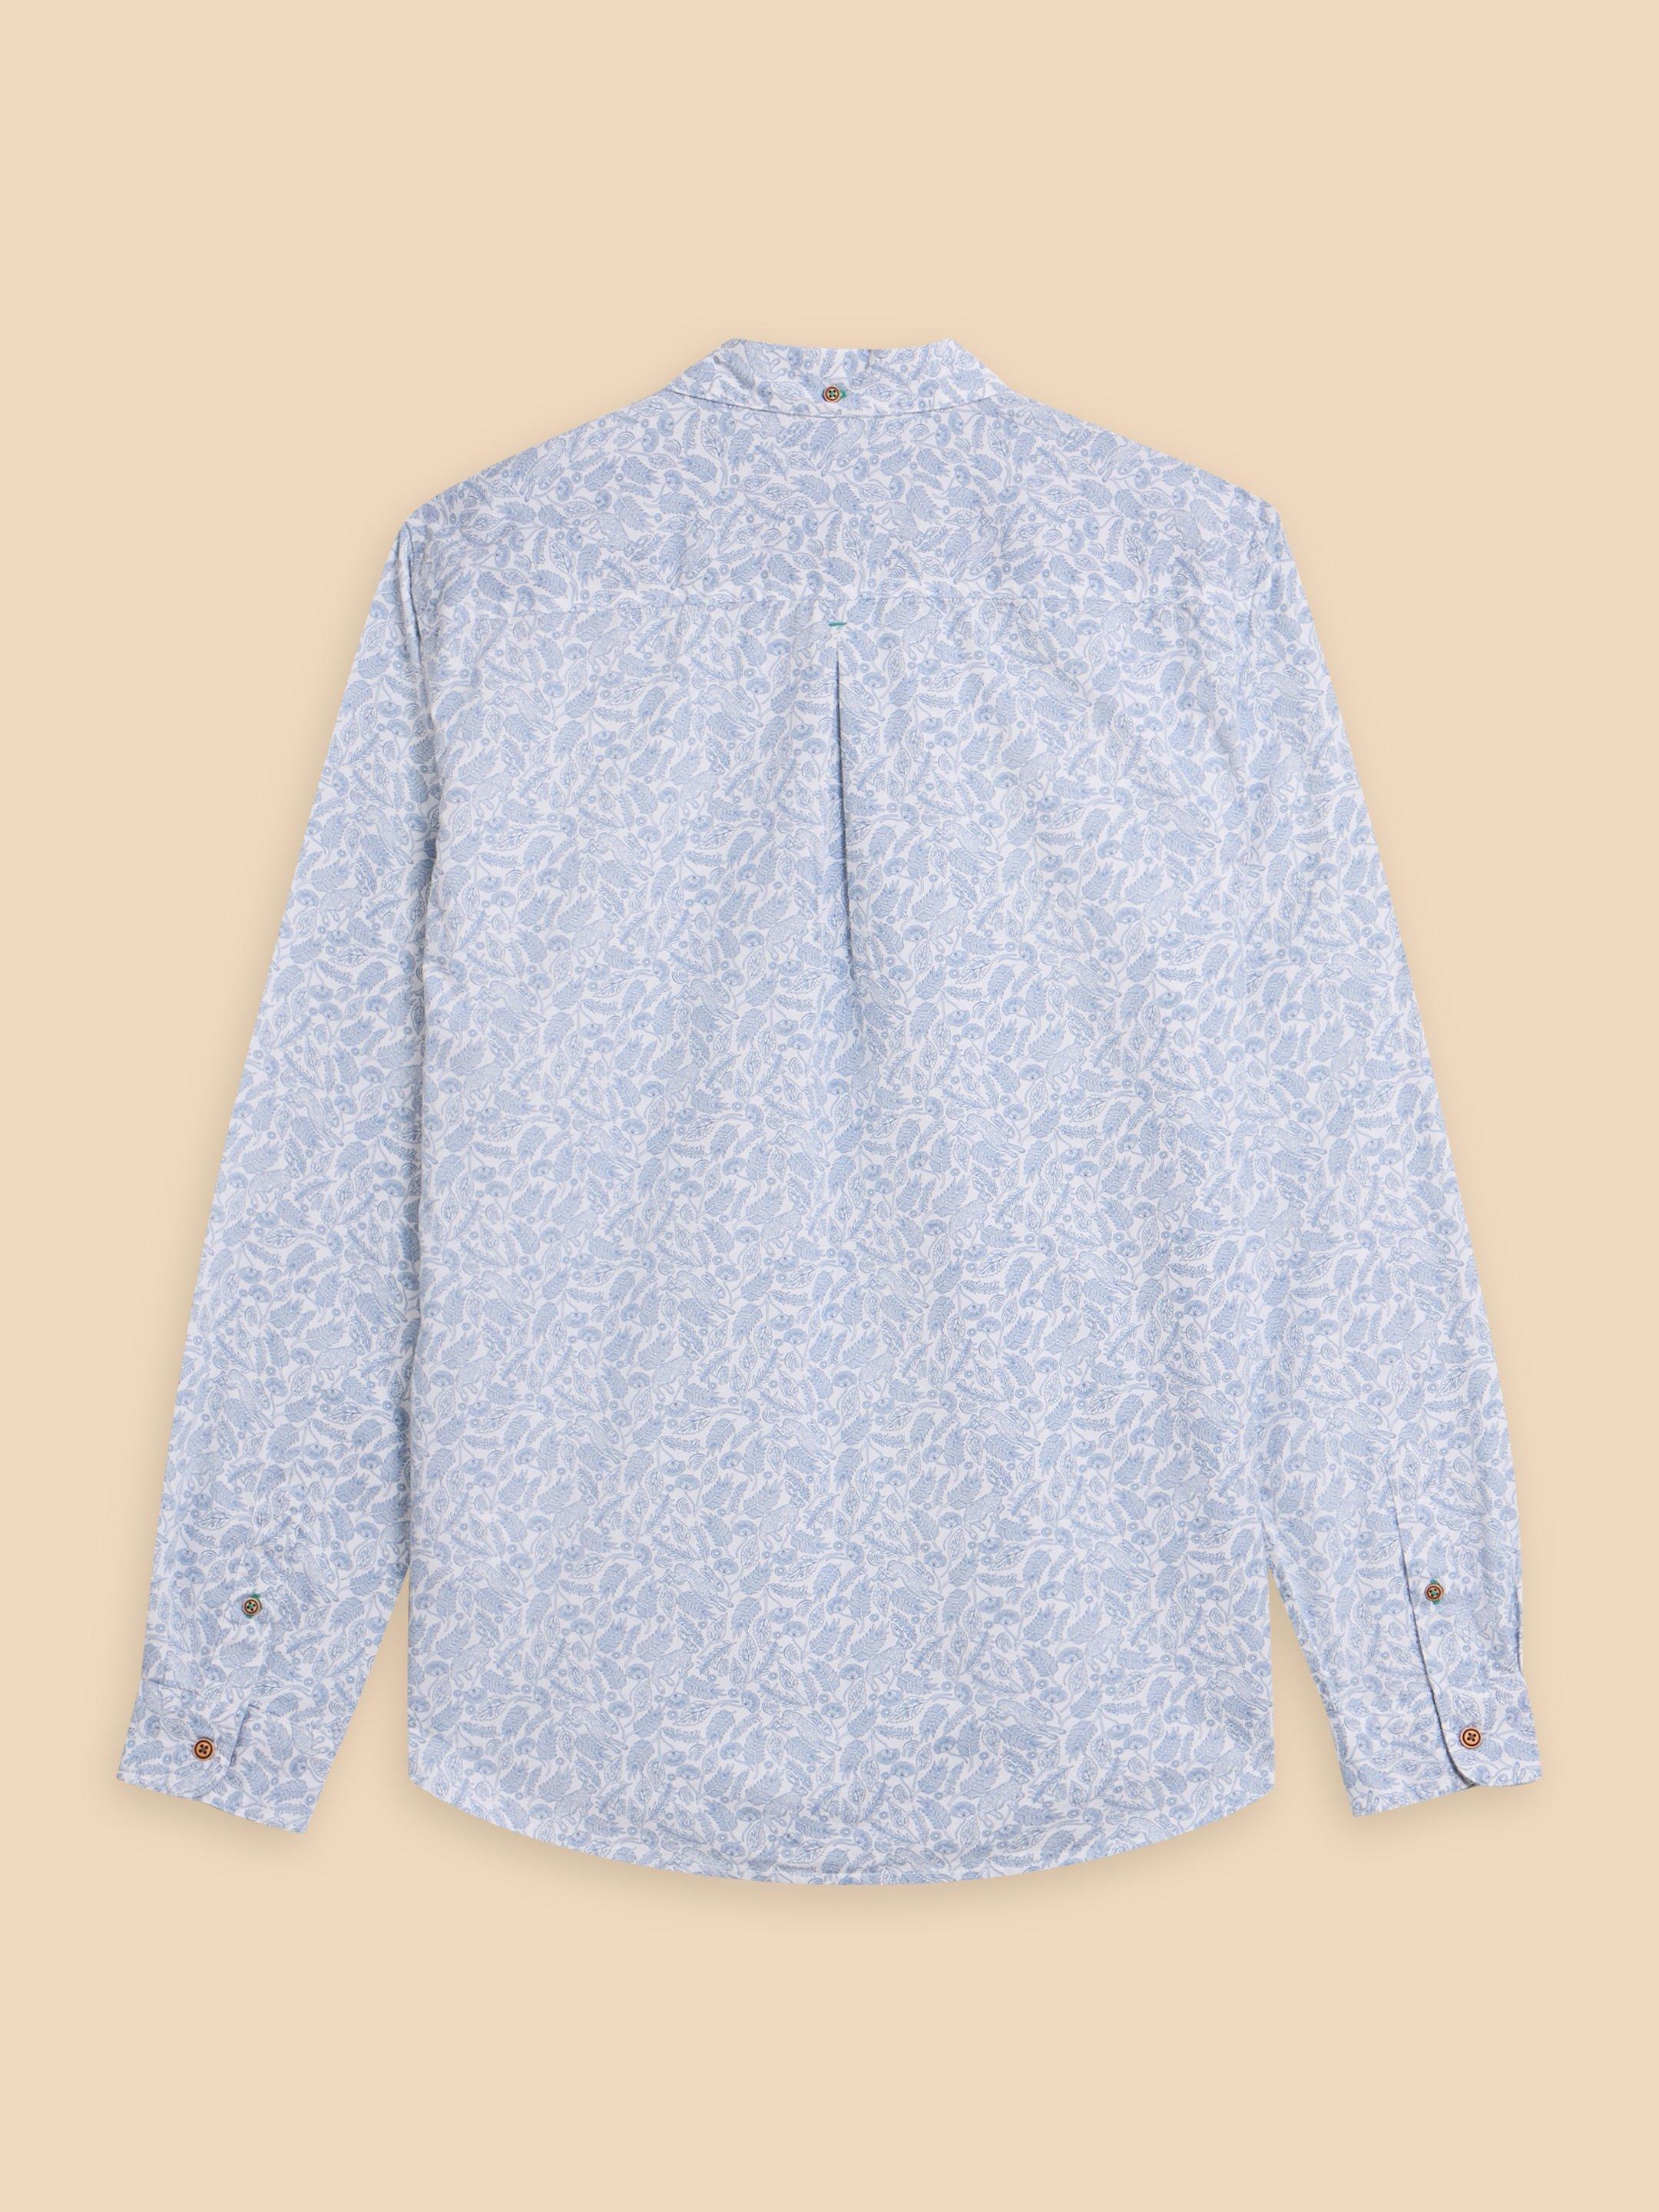 Hare Print Cotton Shirt in WHITE MLT - FLAT BACK